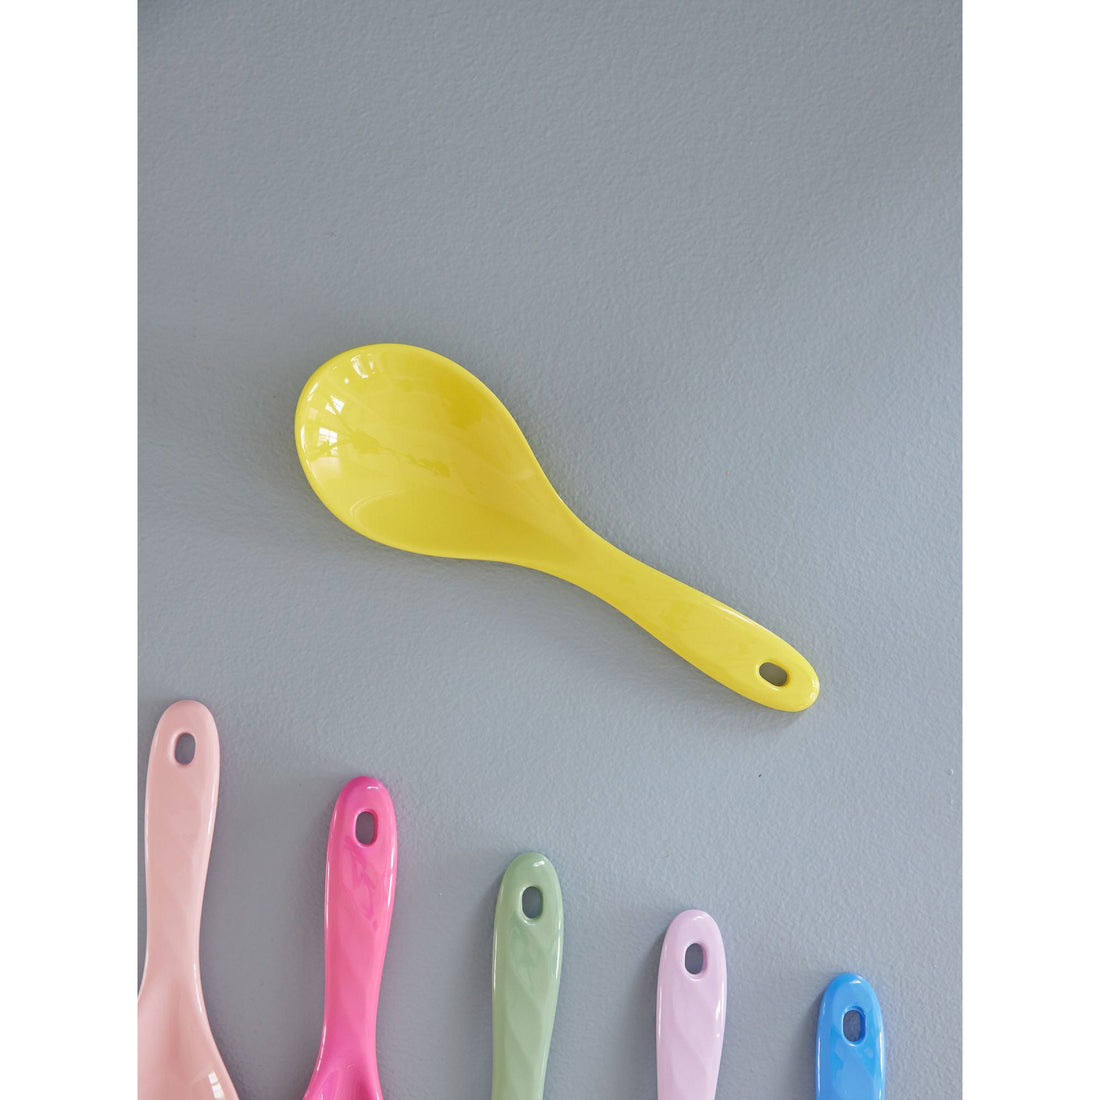 rice-dk-melamine-salad-spoon-in-yellow-rice-mesal-ss23xcy-_